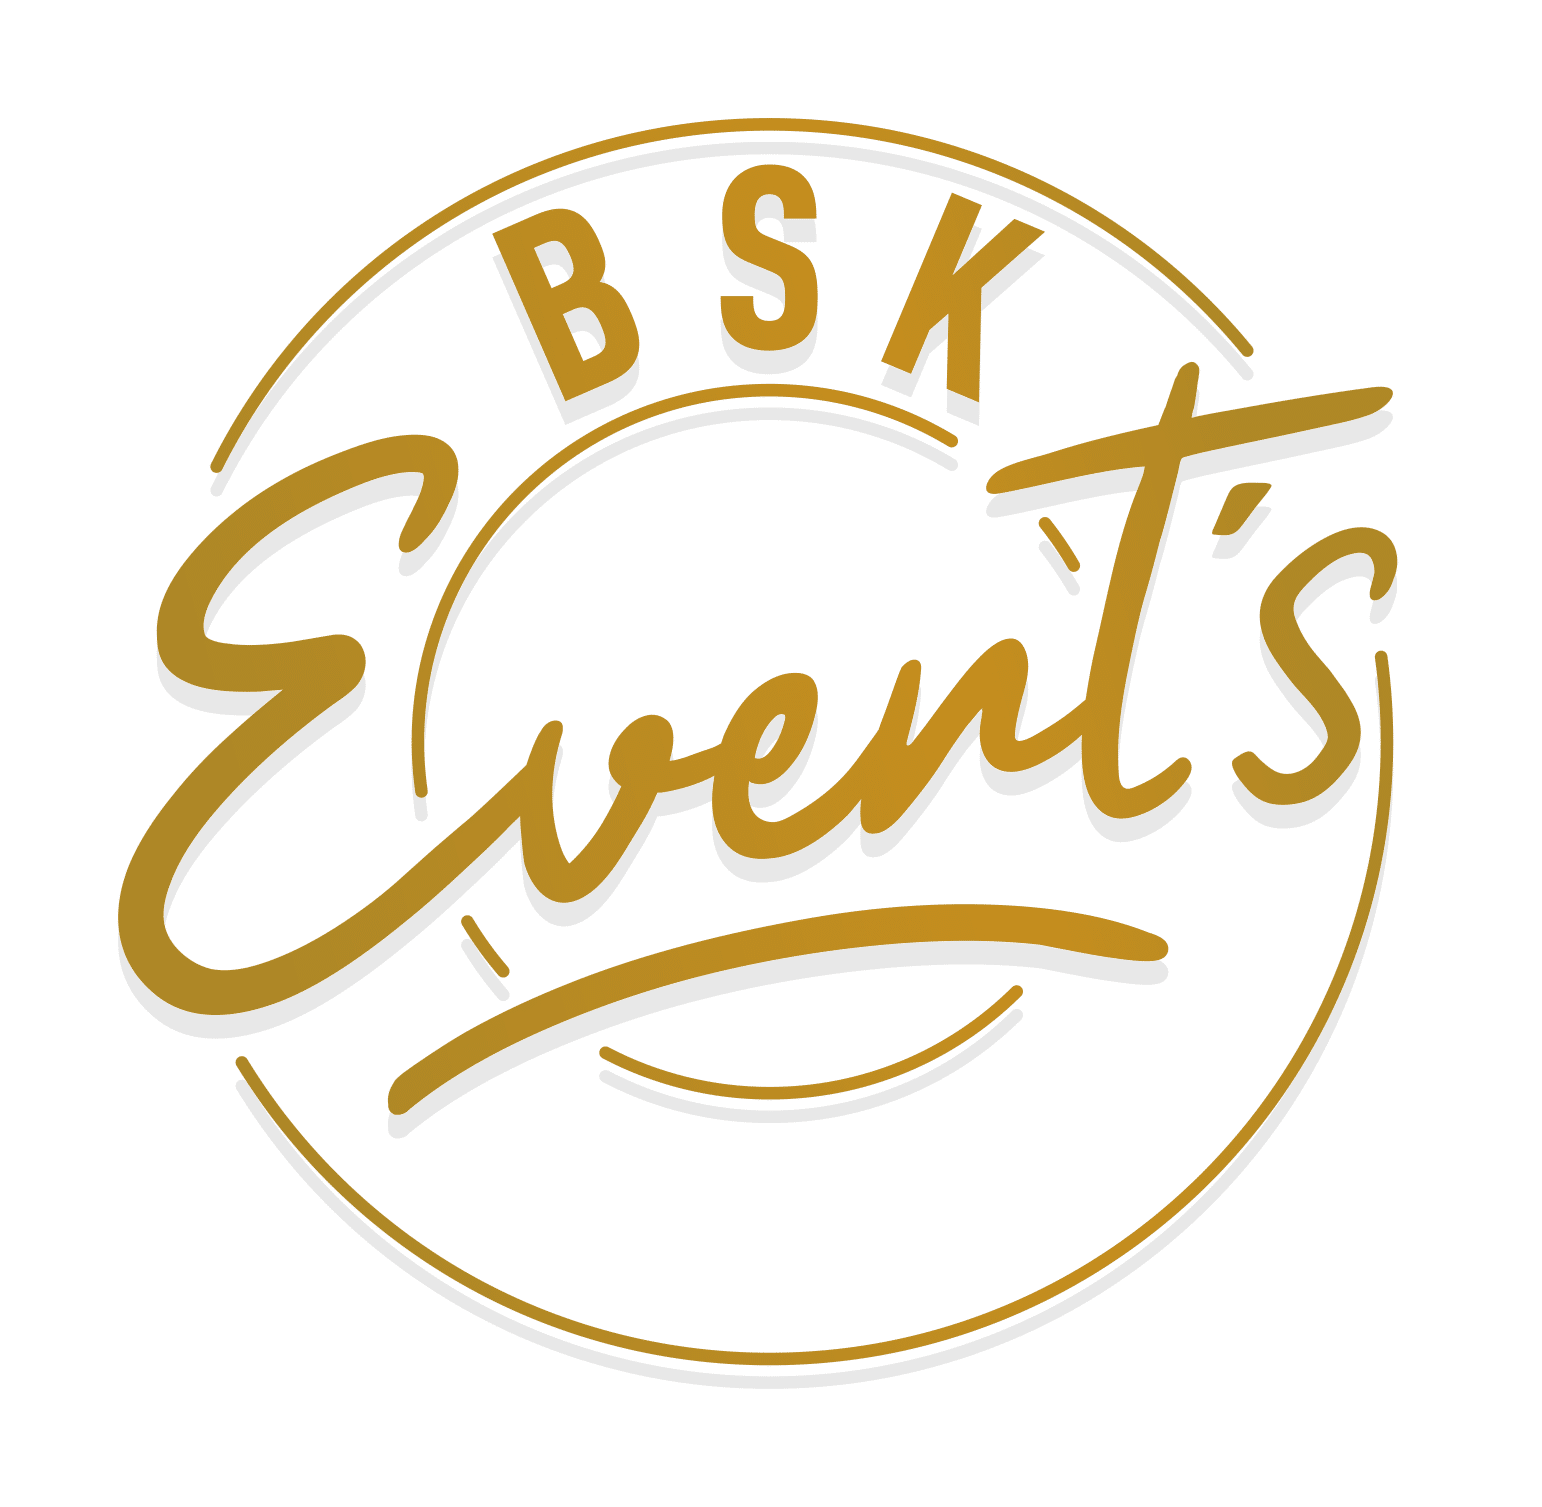 BSK Event's